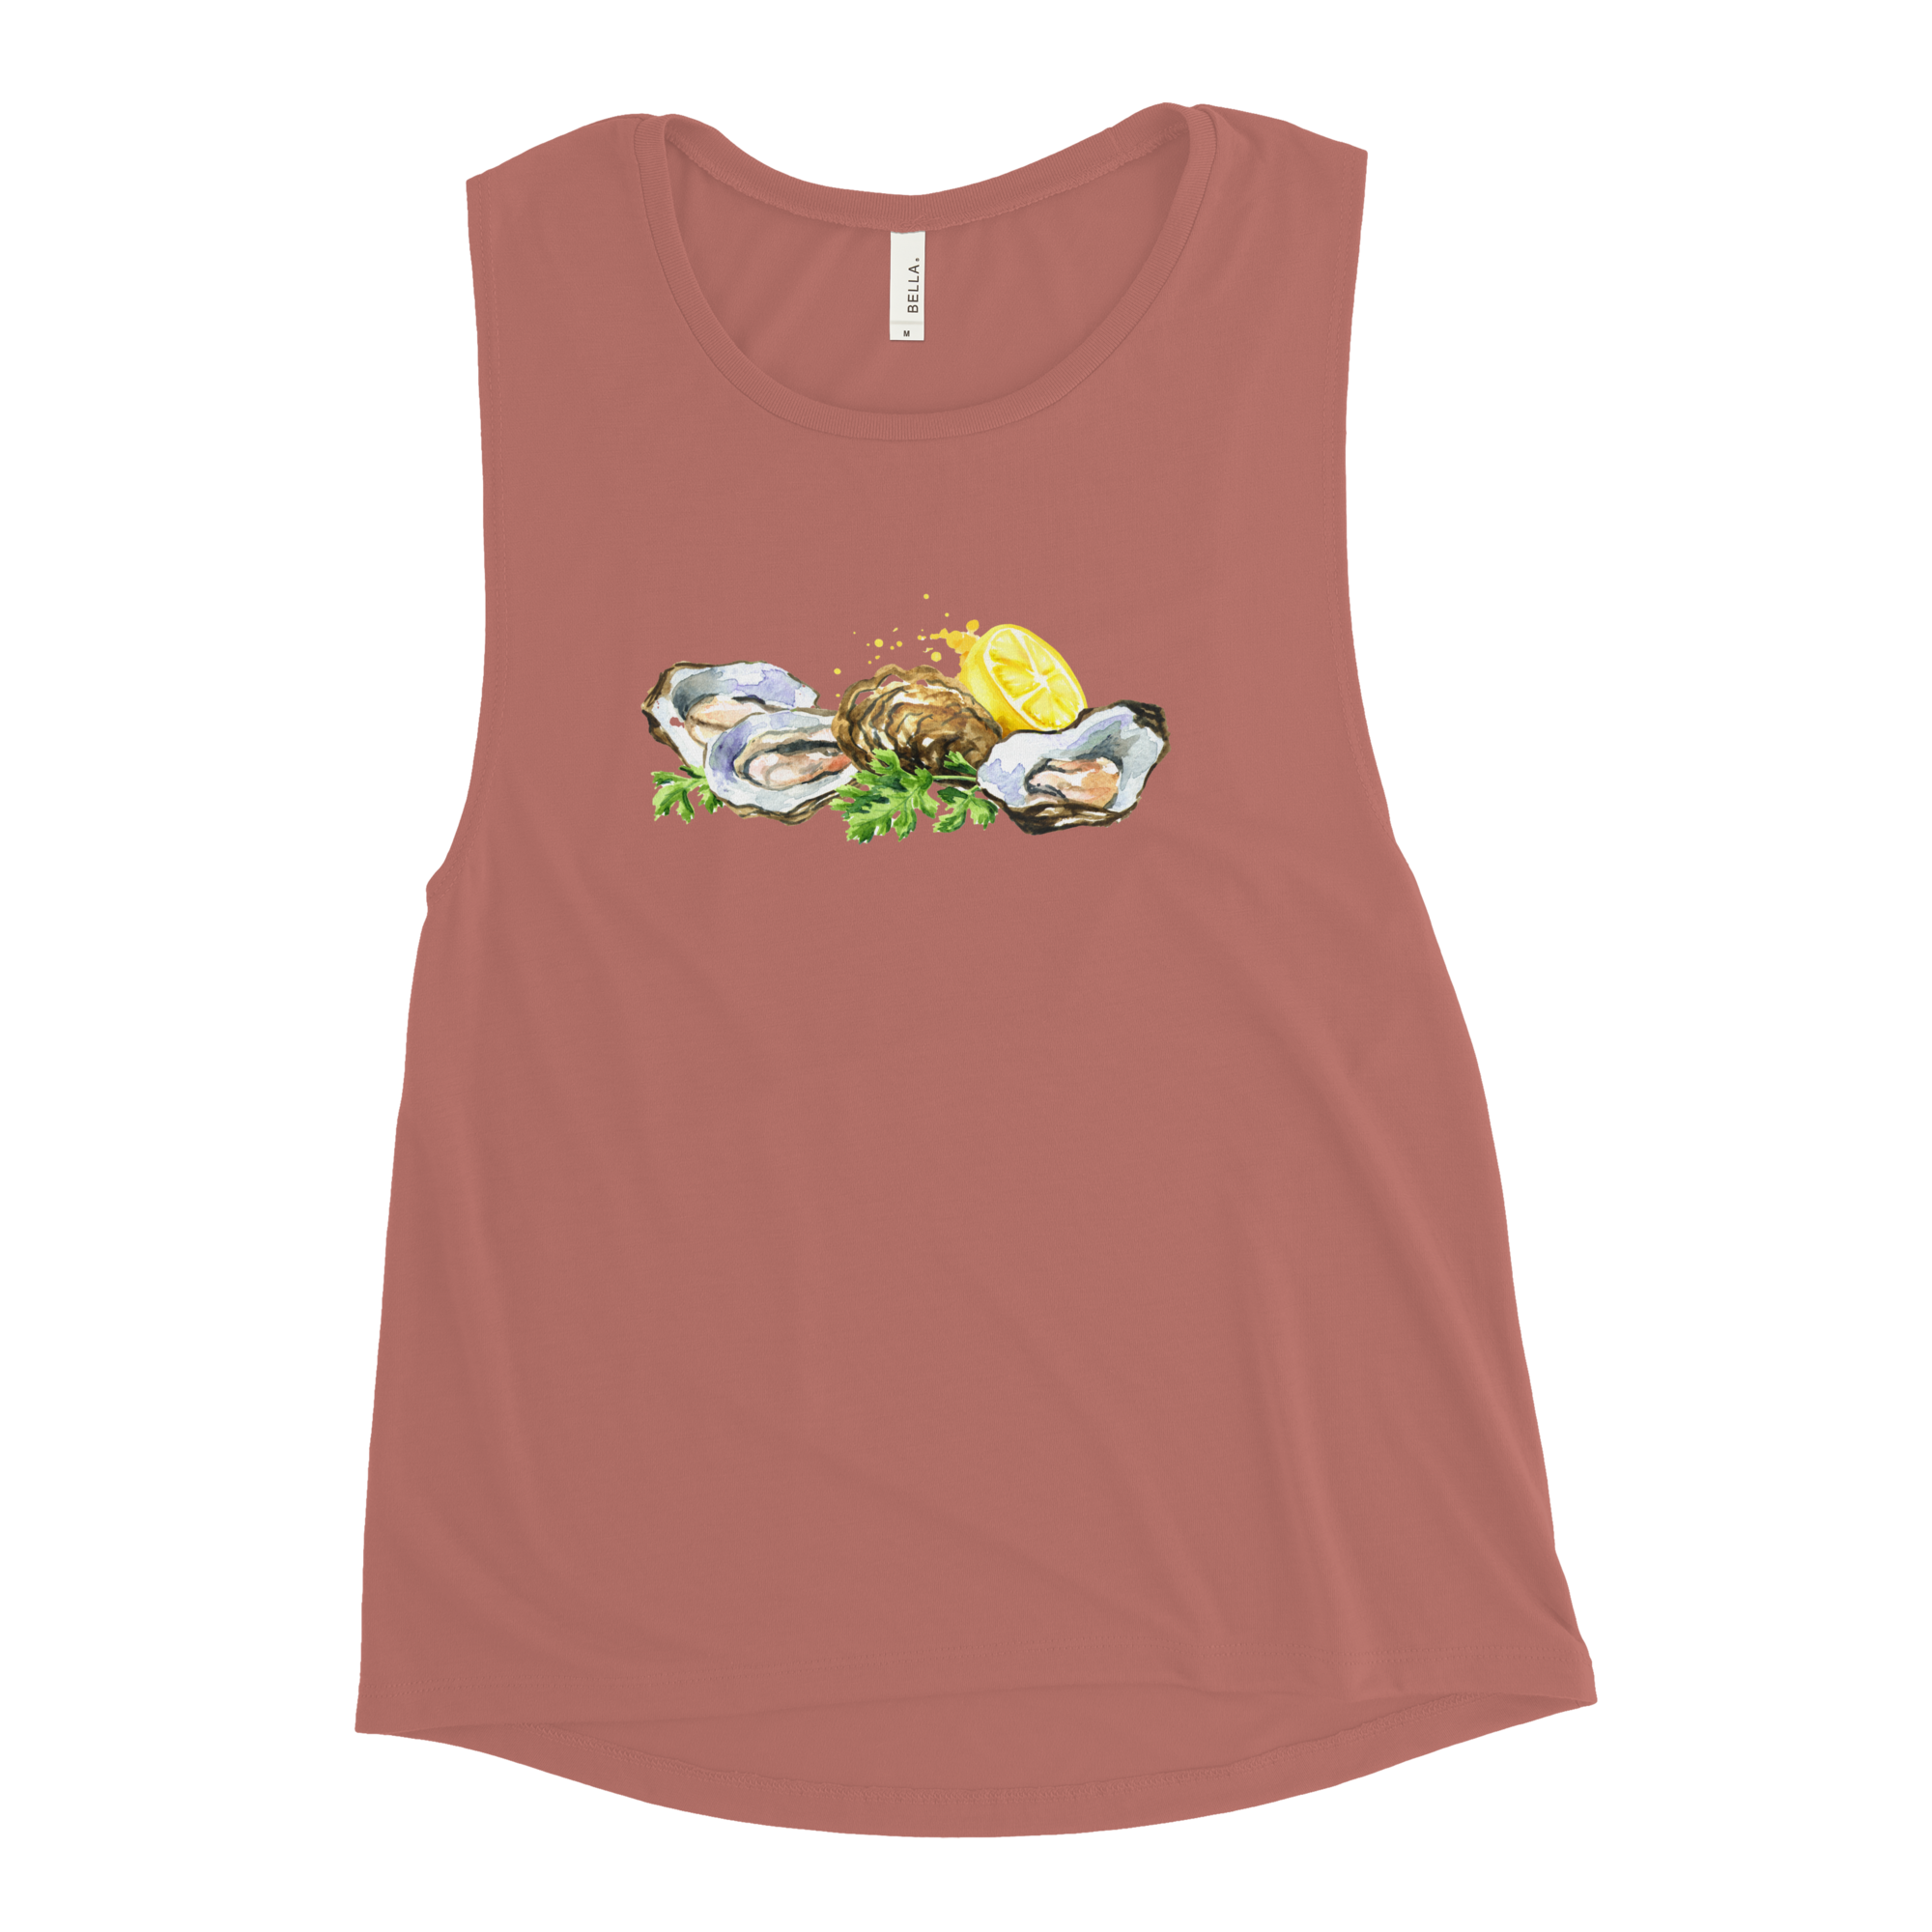 womens-muscle-tank-mauve-front-667b05c433815.png